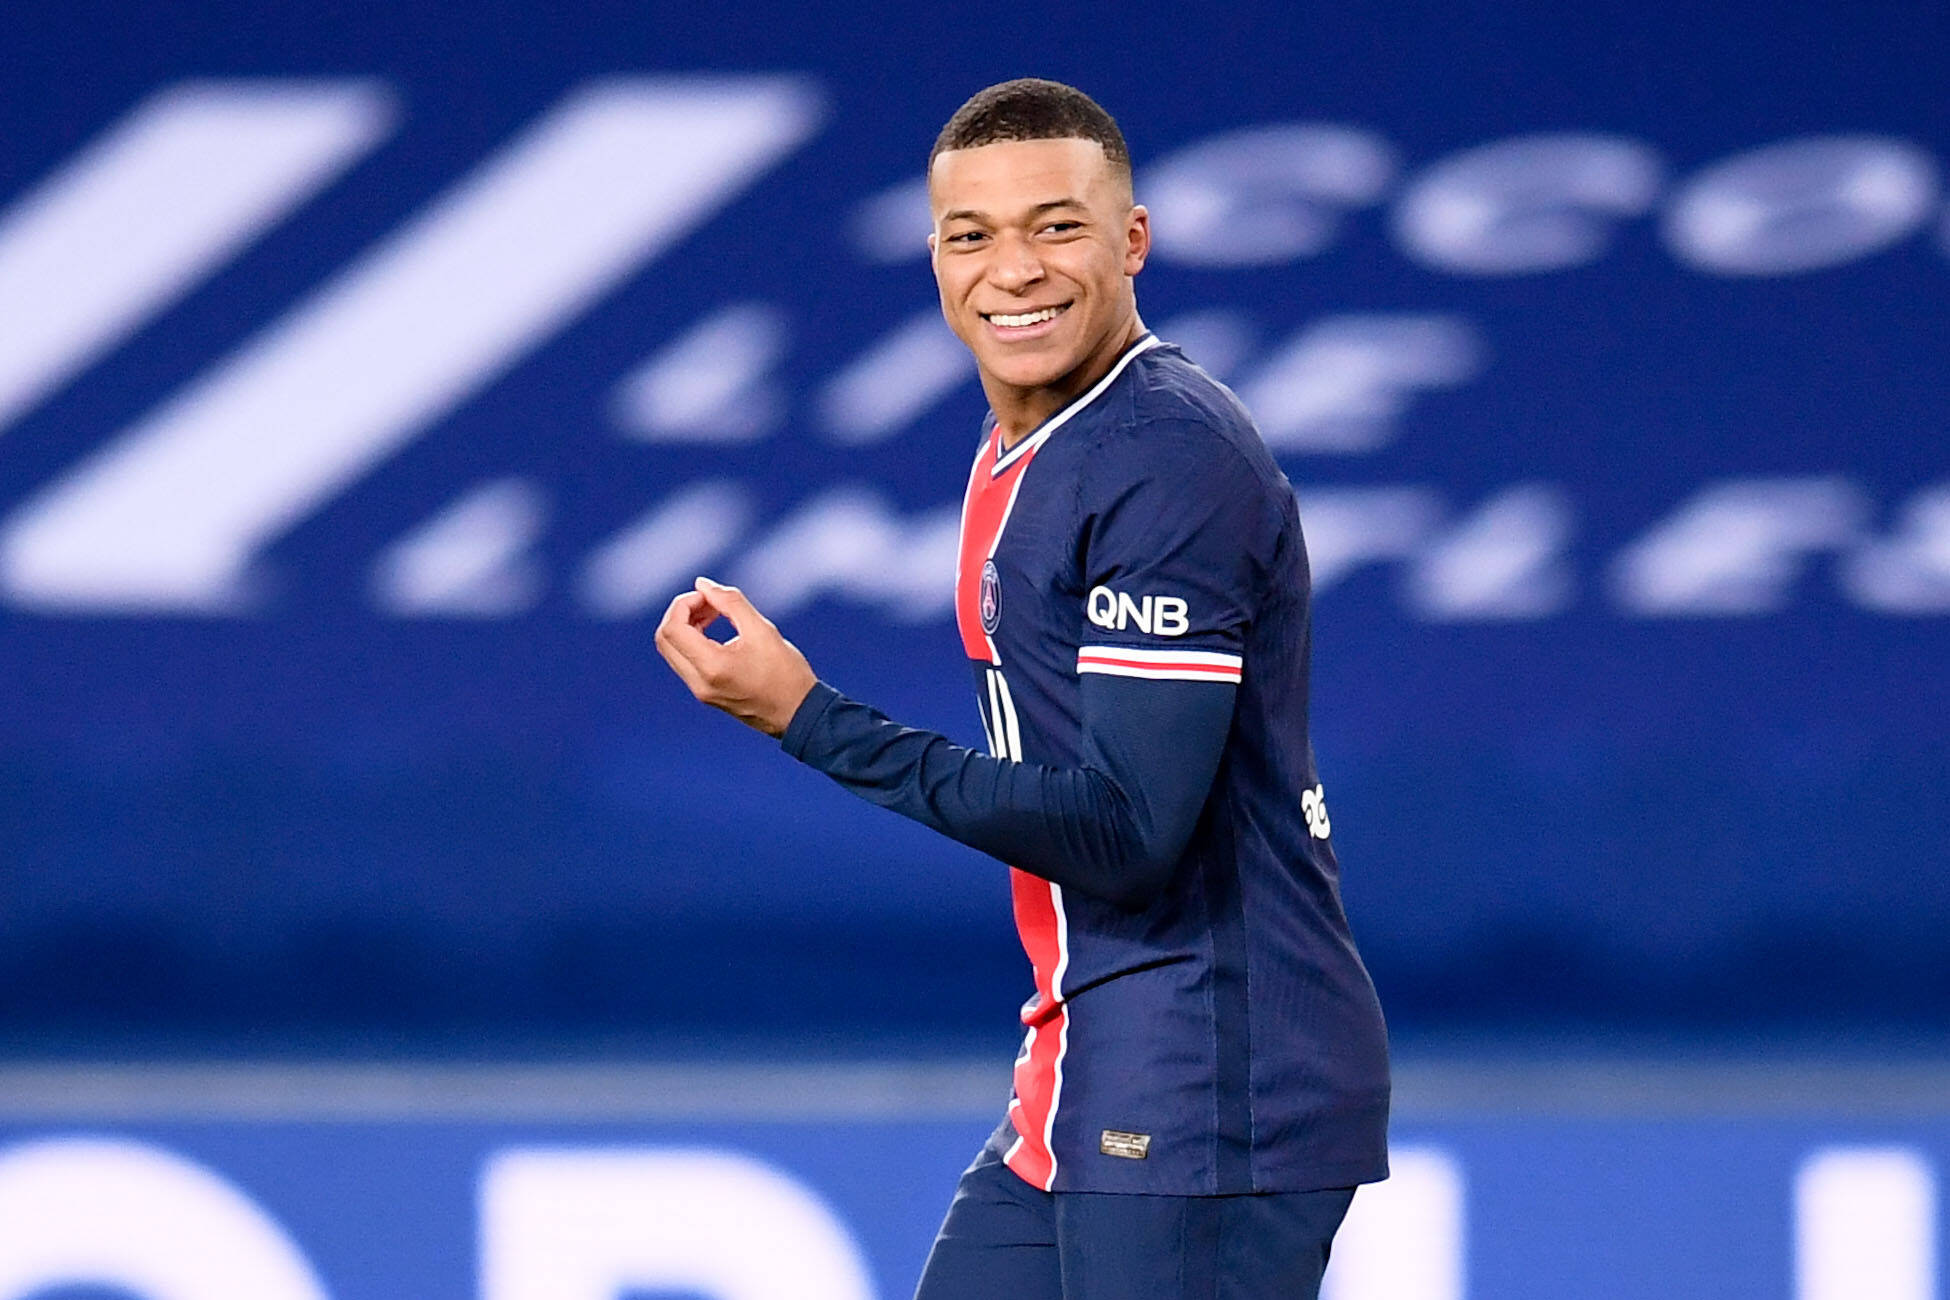 Mbappe Made GoalScoring History During PSG's Fixture Against Nimes